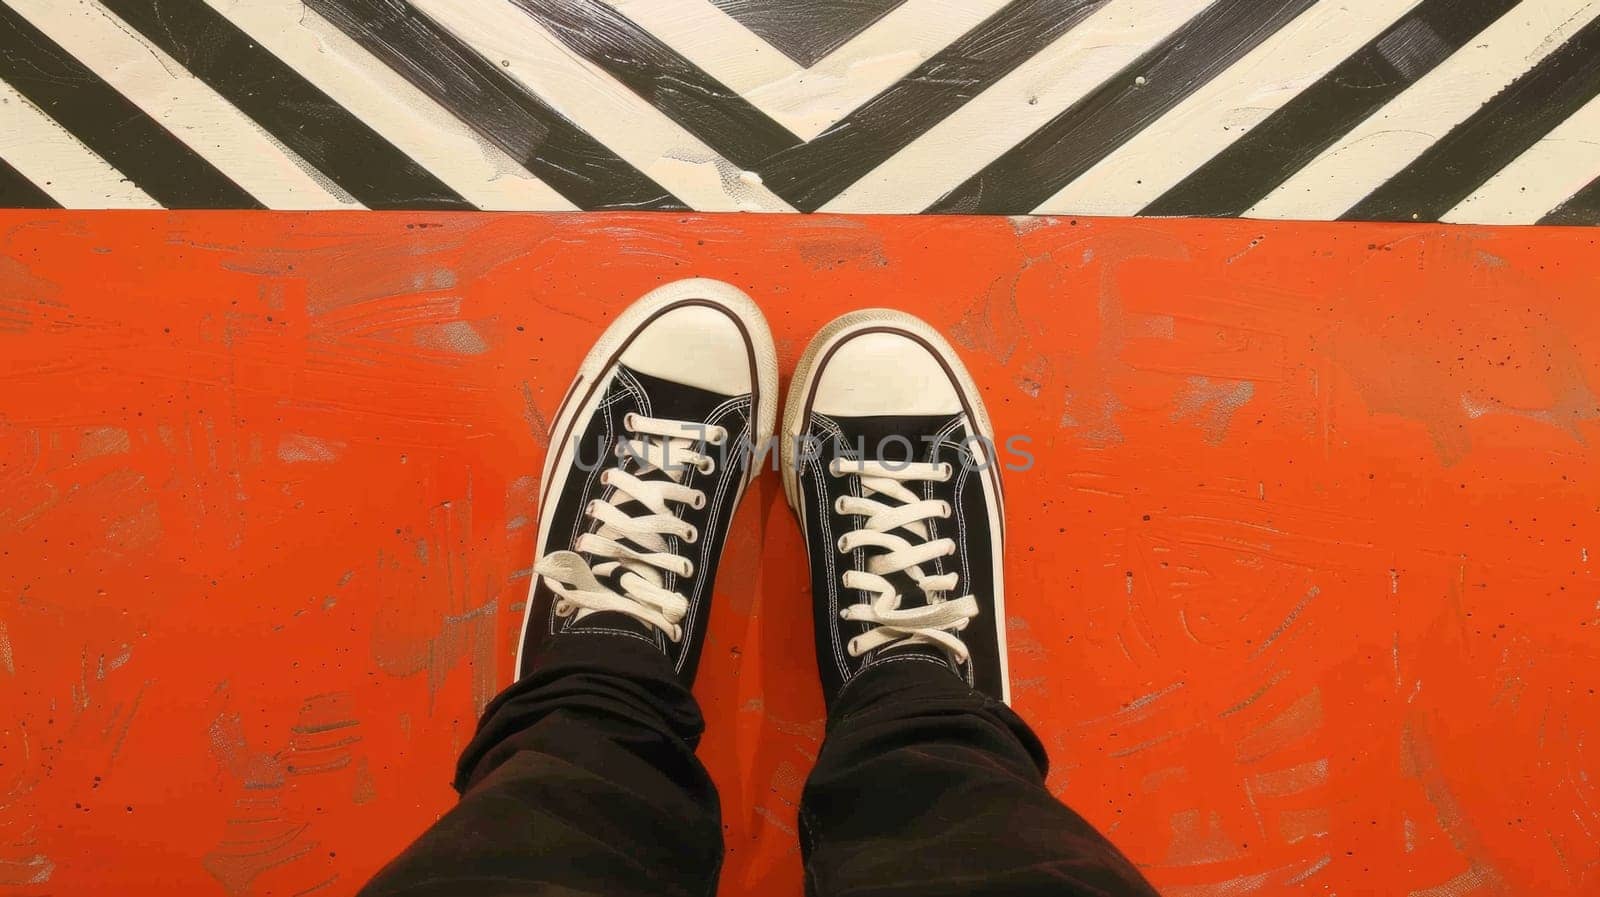 A person wearing black and white sneakers standing on a red floor, AI by starush